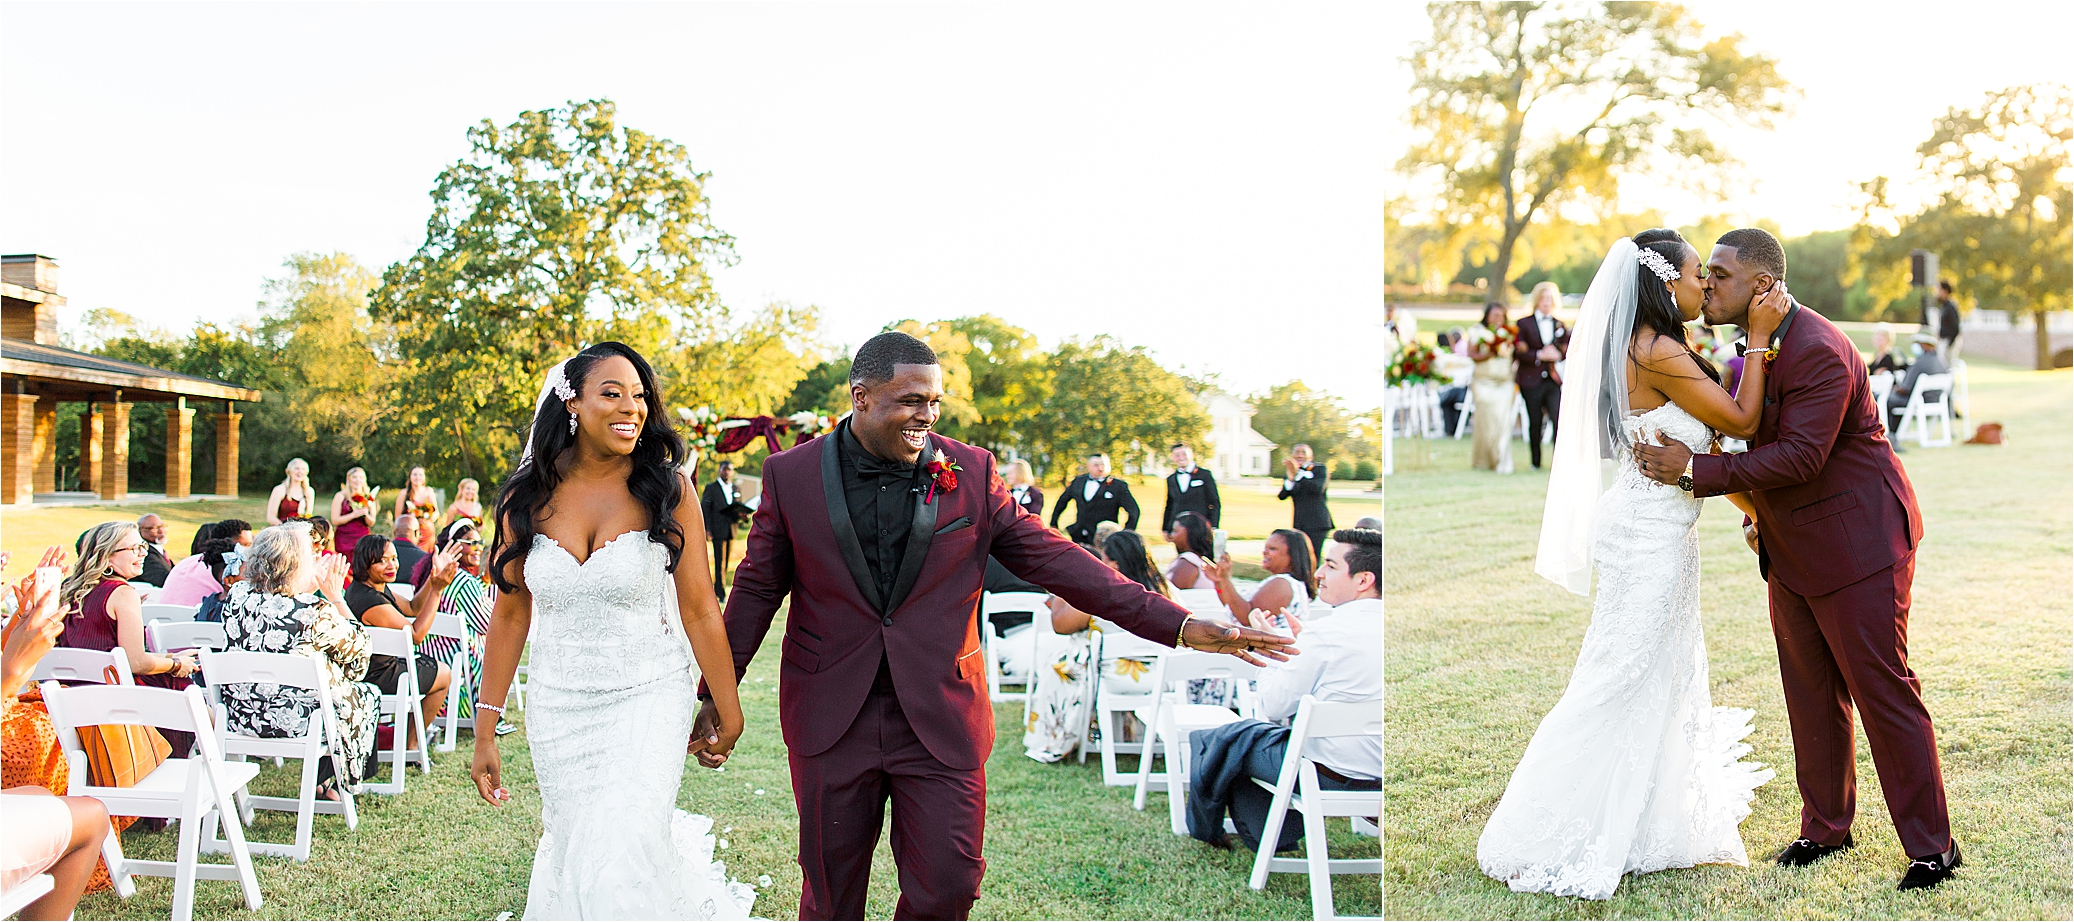 A bride and groom celebrate as newlyweds during their recessional at Morgan Creek Barn 